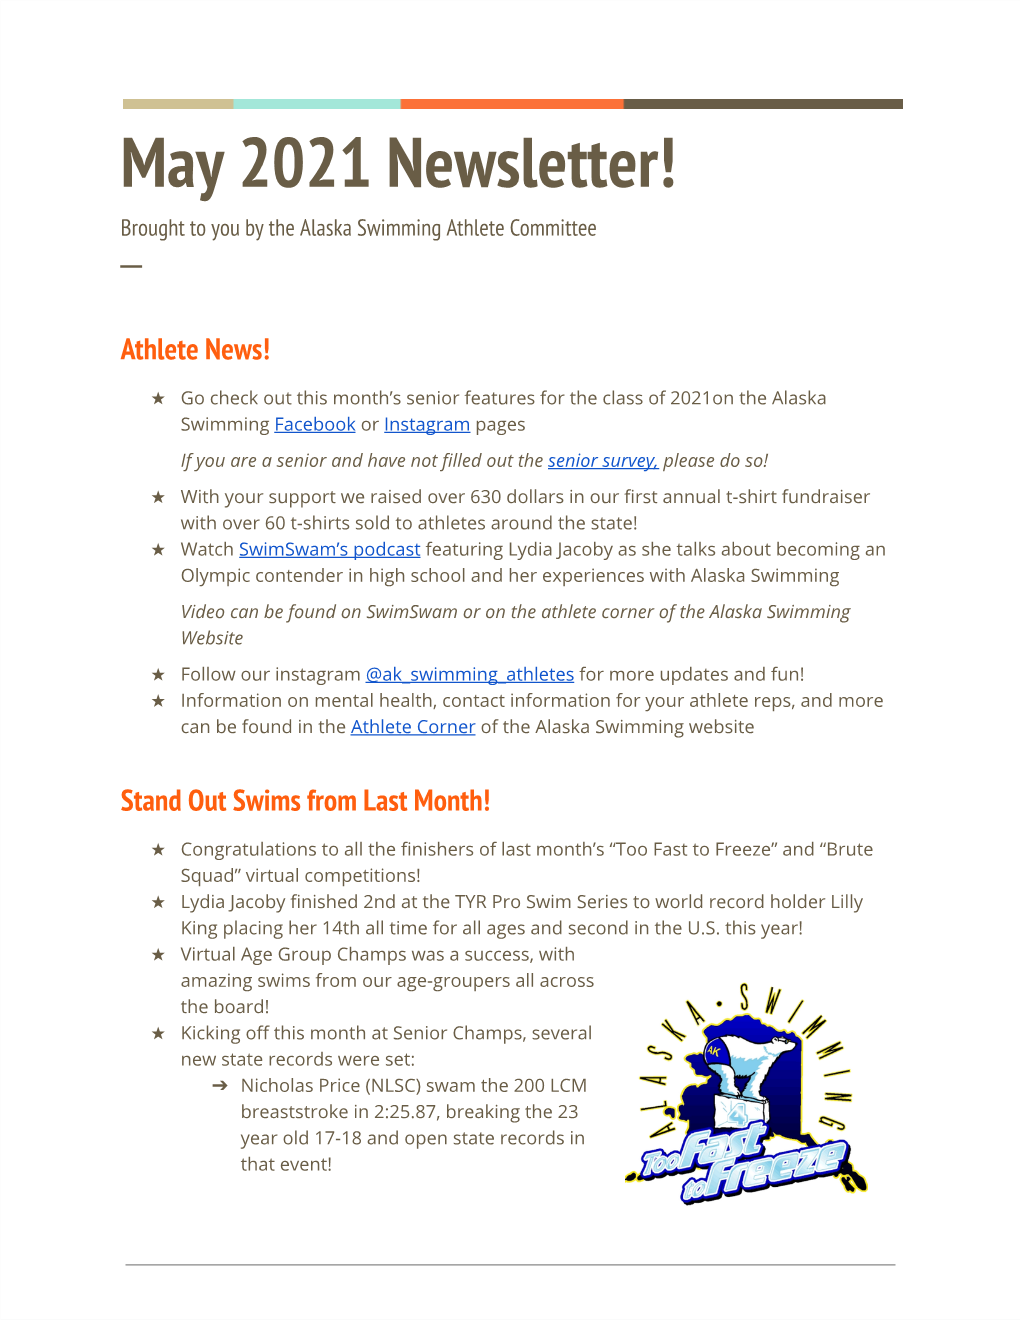 May 2021 Newsletter! Brought to You by the Alaska Swimming Athlete Committee ─